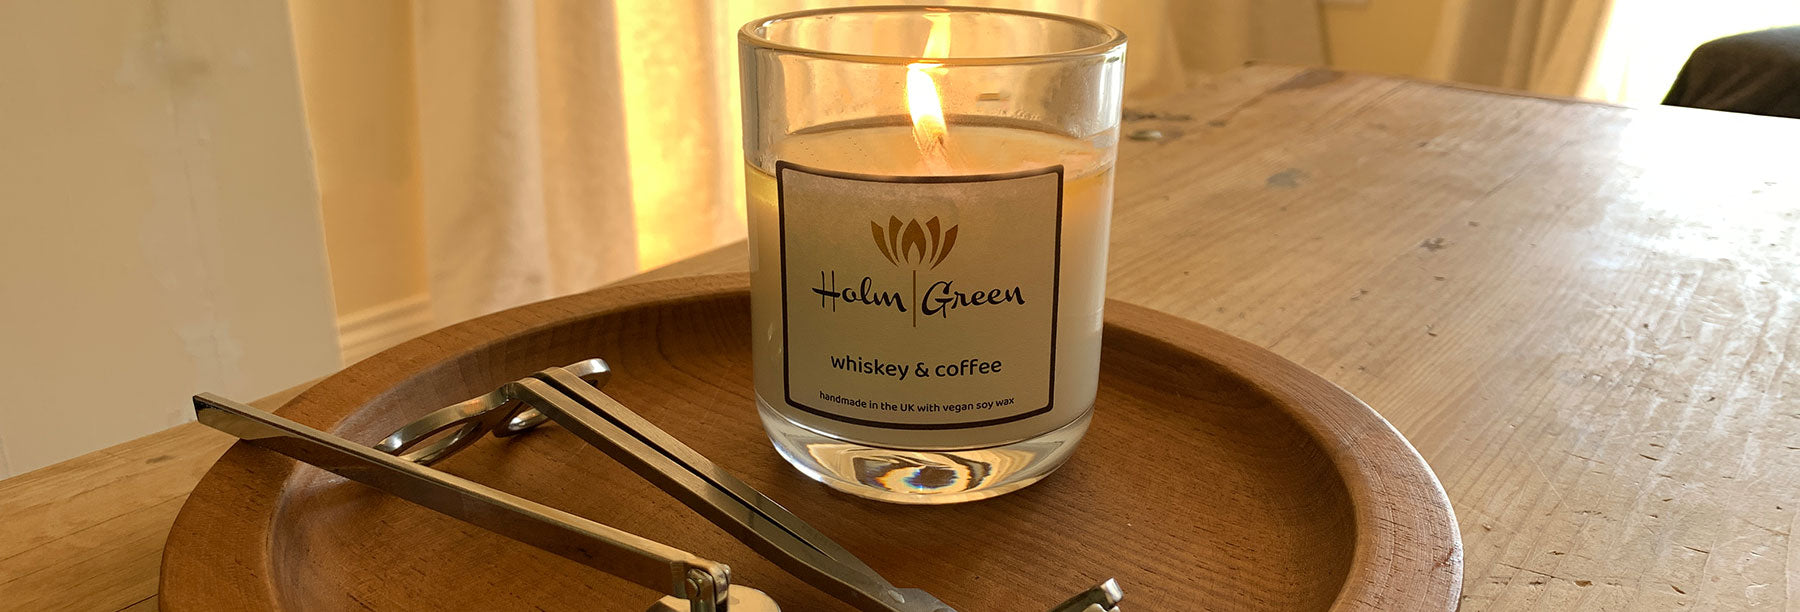 Candle Care and Safety Information for Holmgreen Scented Soy Wax Candles Gift Box Included.